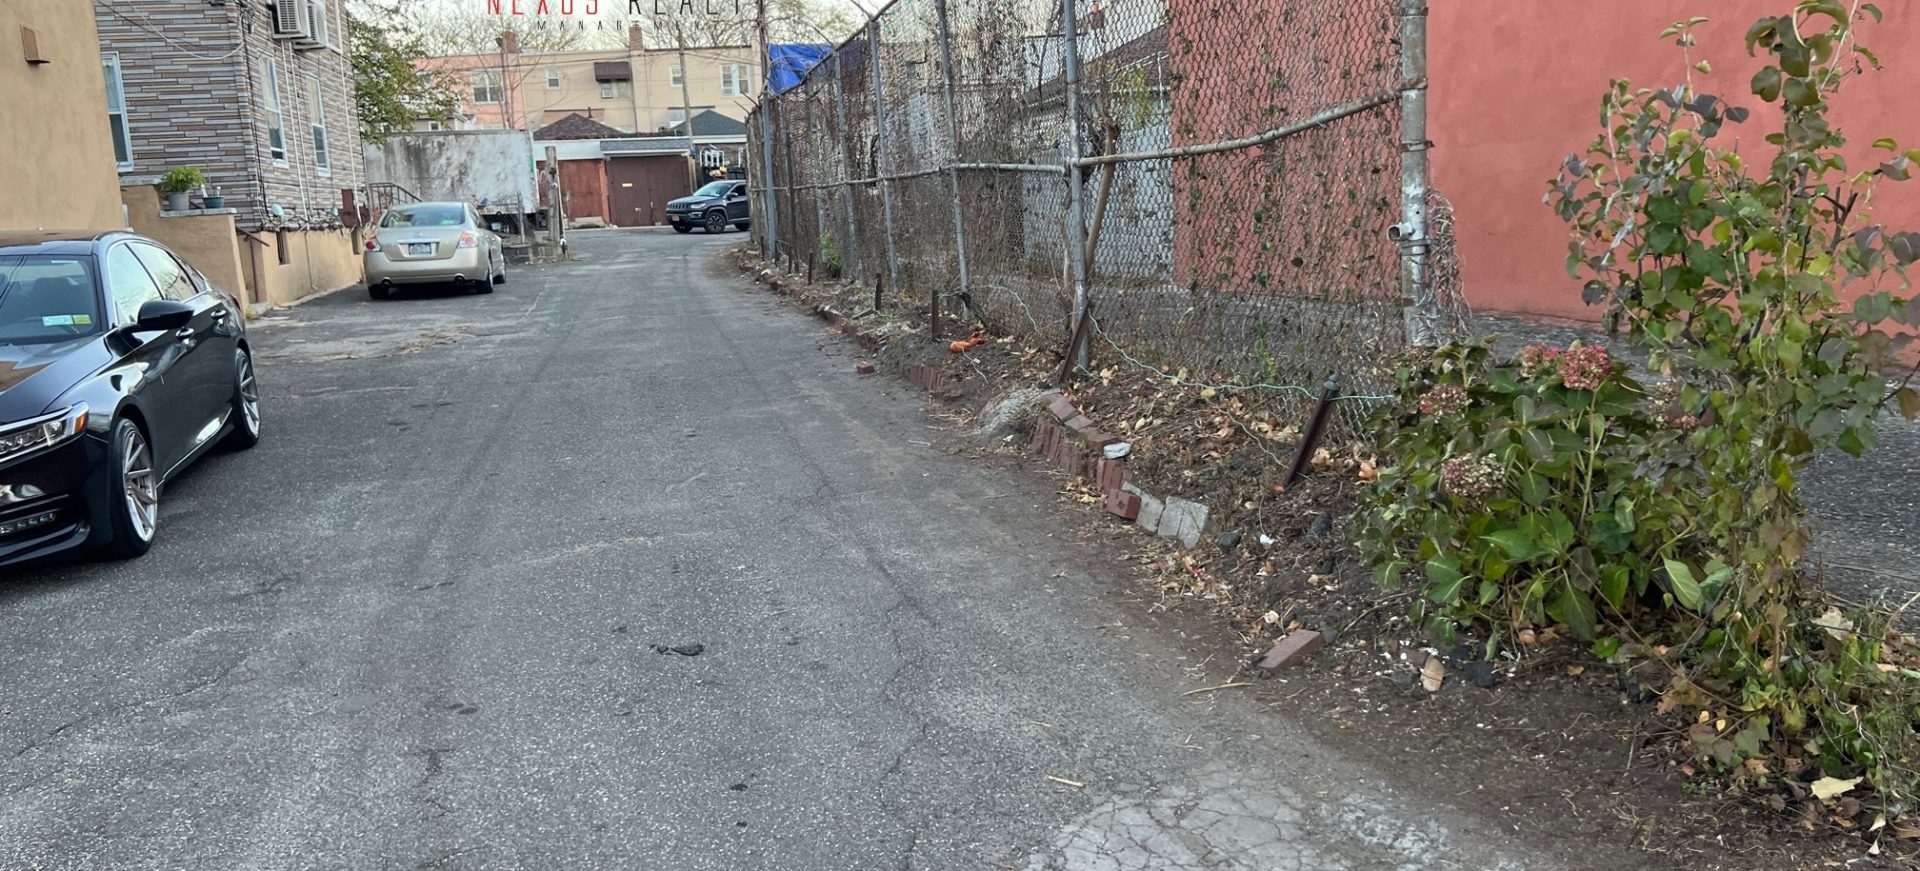 Parking spaces for rent in Astoria $200